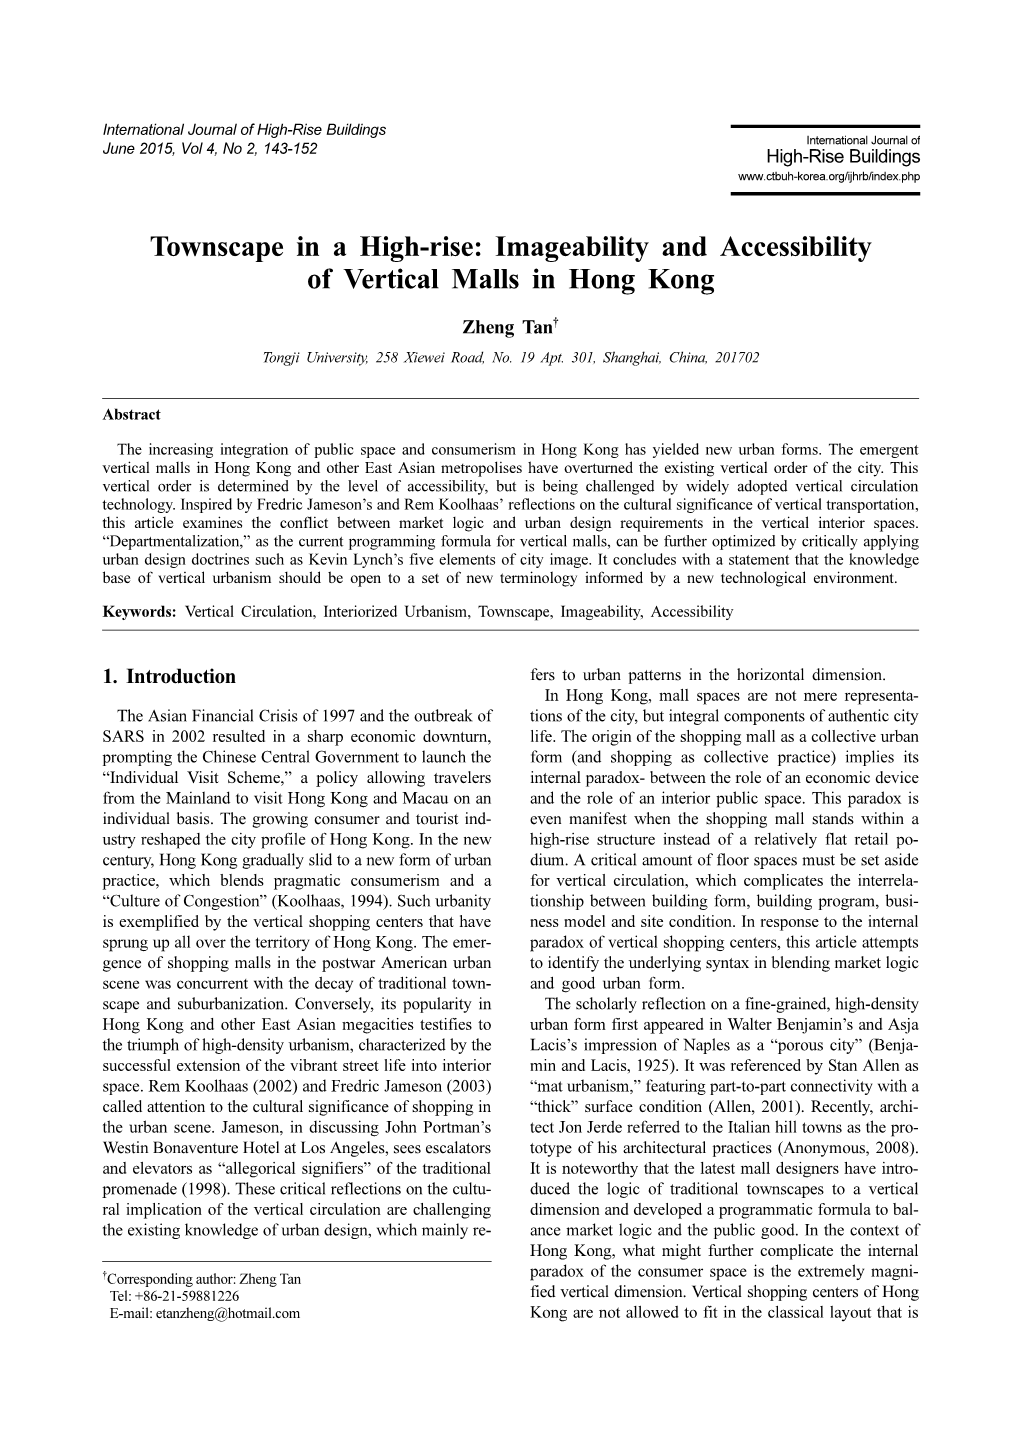 Imageability and Accessibility of Vertical Malls in Hong Kong